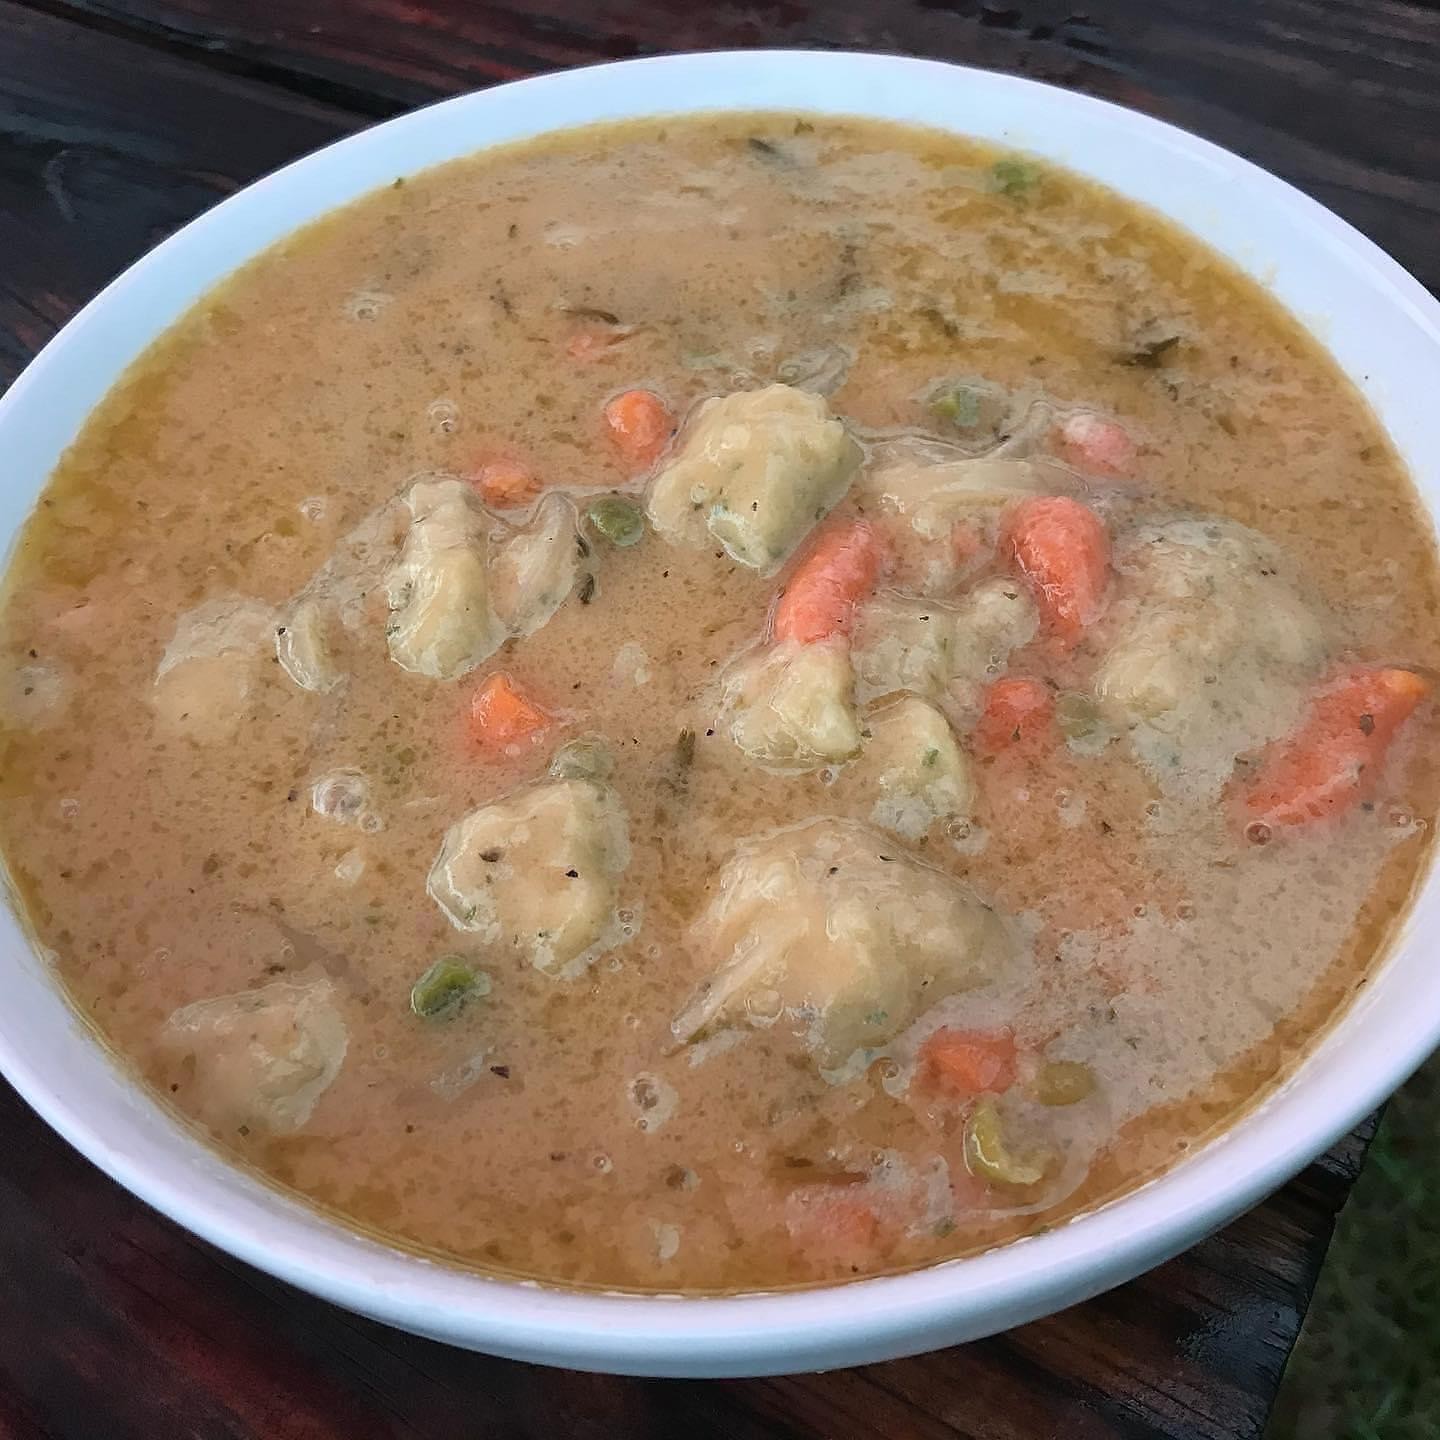 Smoaked Chicken and Dumplings